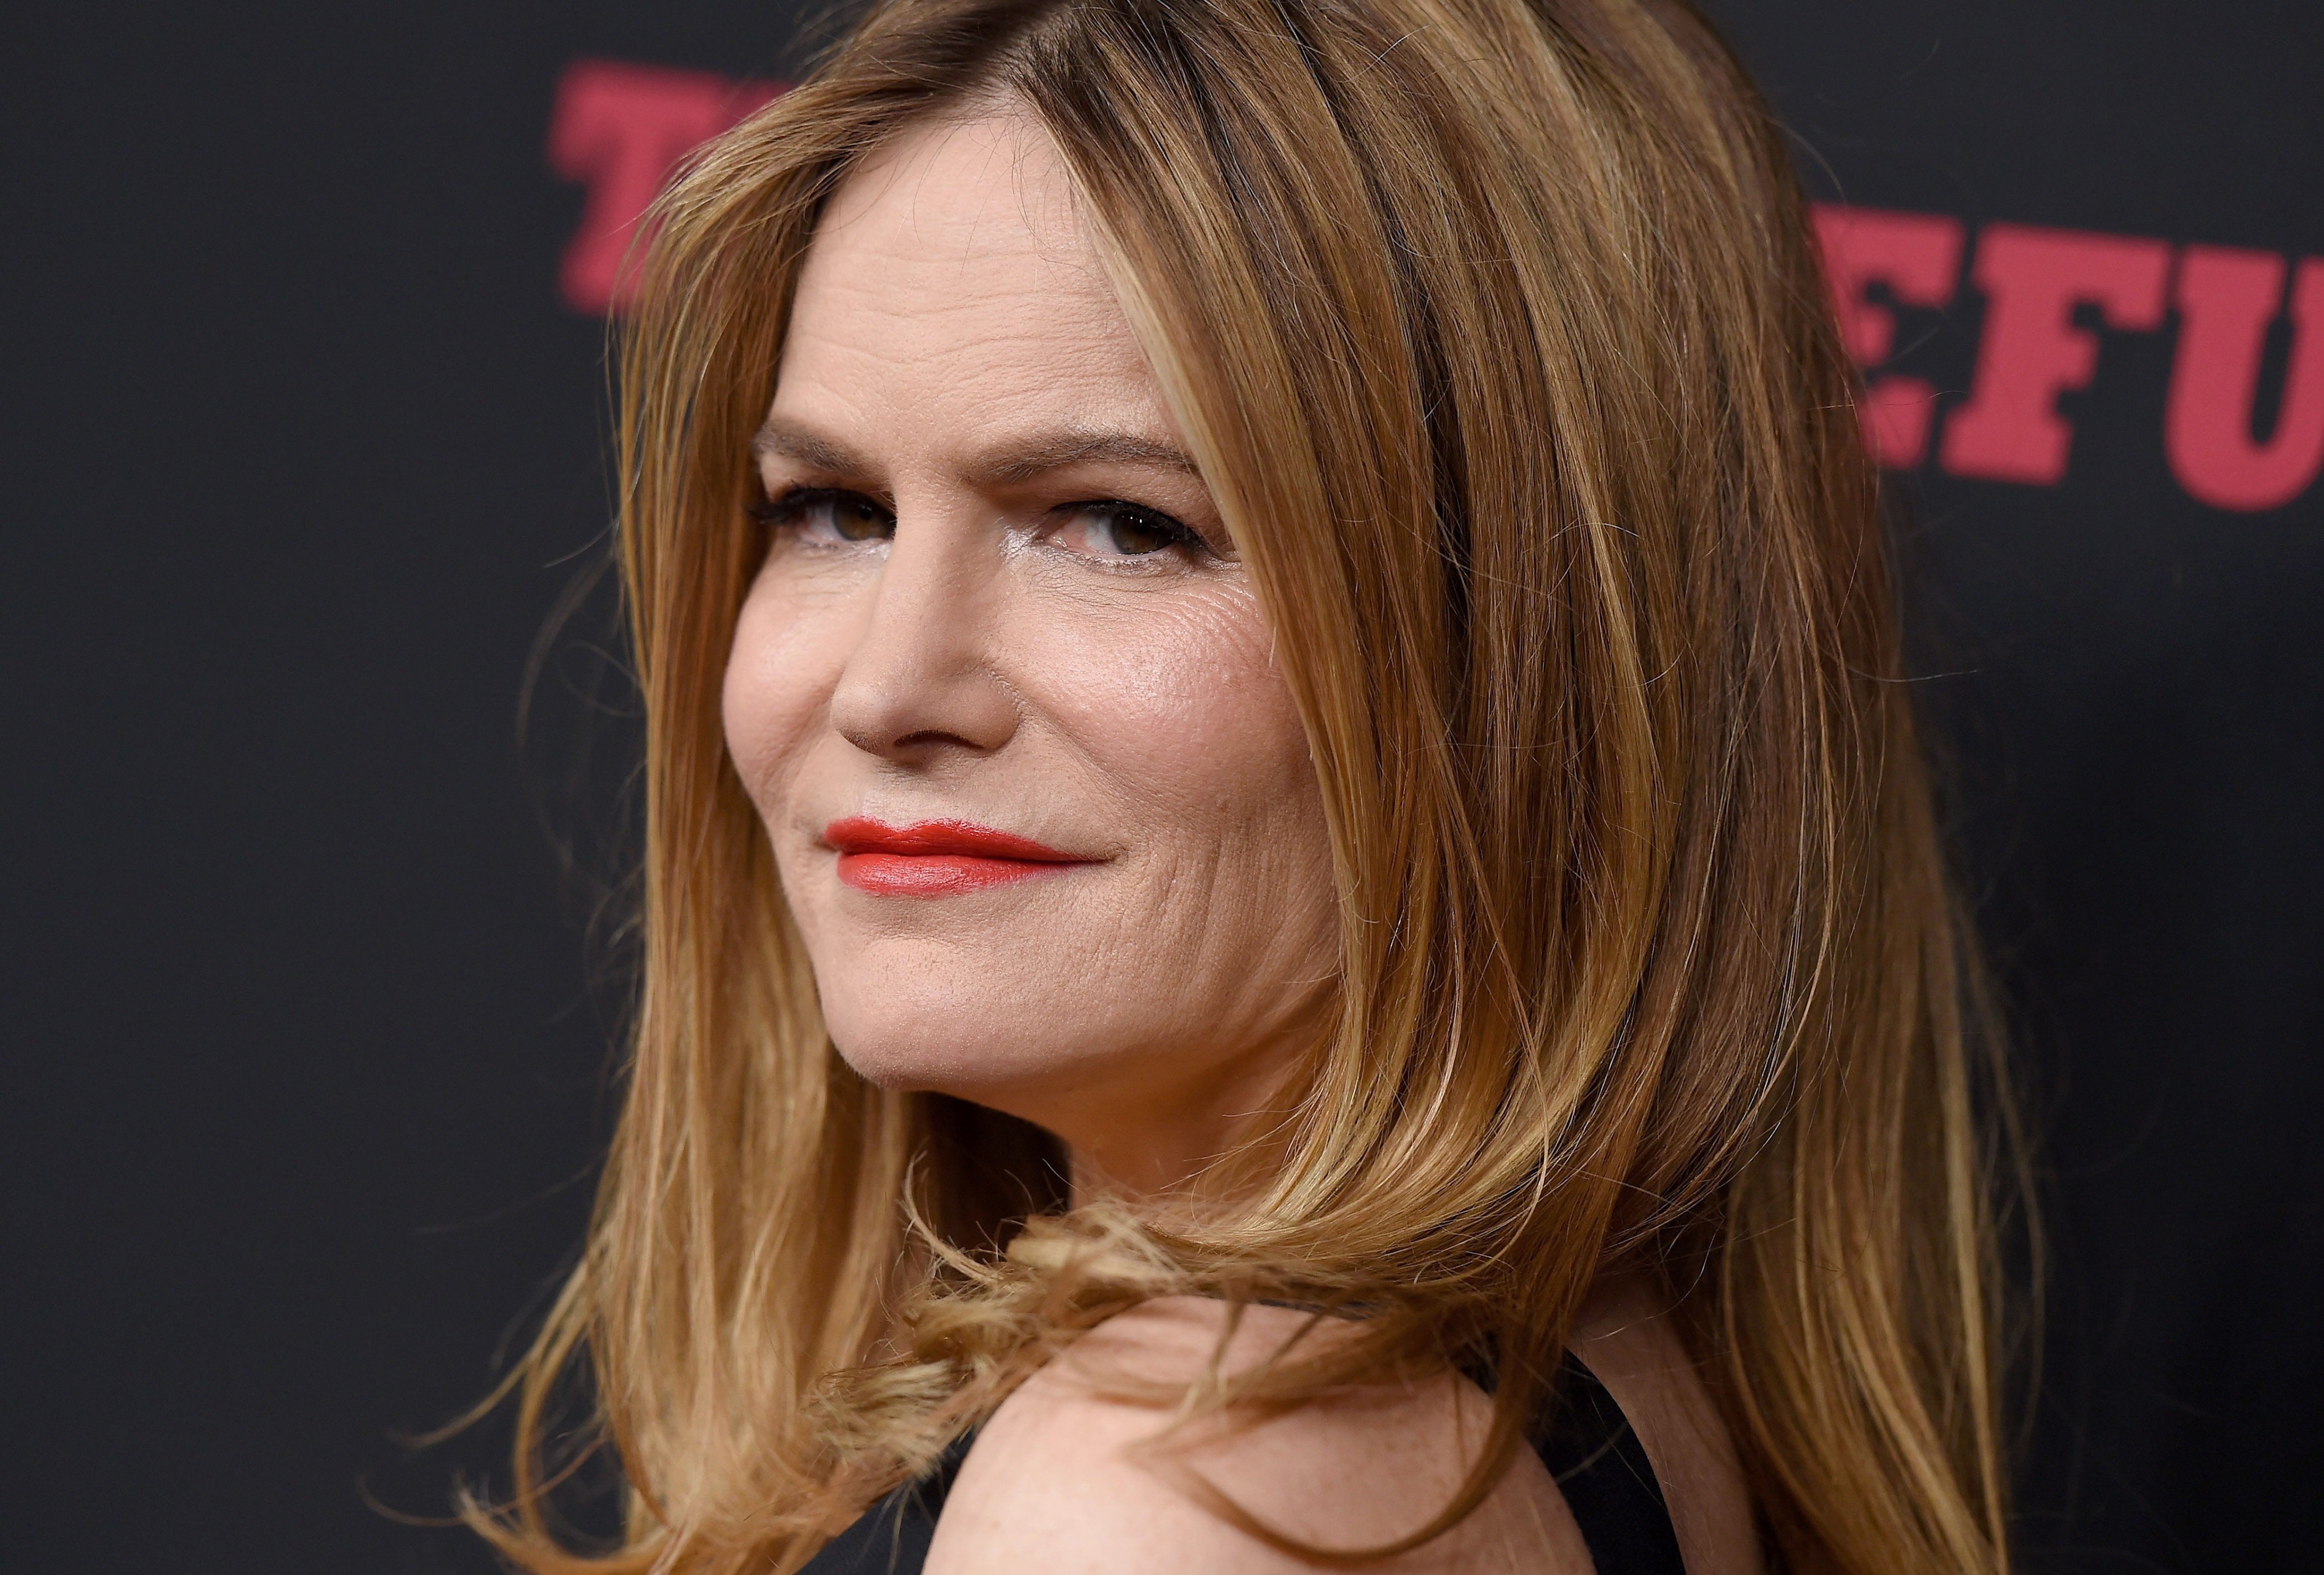 Actress Jennifer Jason Leigh arrives at the Los Angeles Premiere of 'The Hateful Eight' at ArcLight Cinemas Cinerama Dome on December 7, 2015 in Hollywood, California. | Source: Getty Images